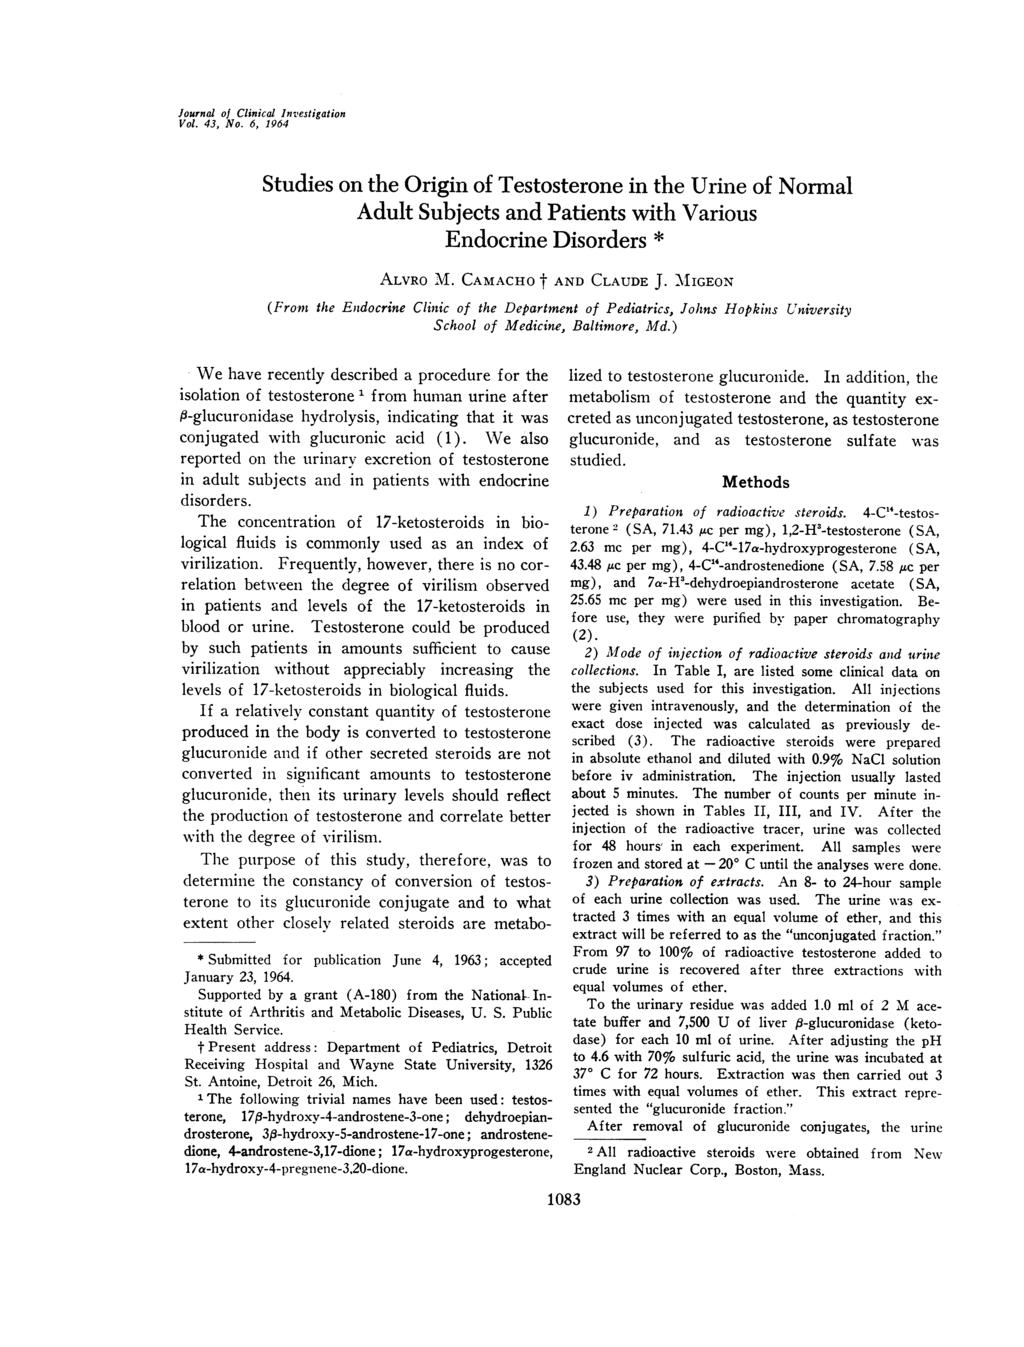 Journal of Clinical Investigation Vol. 43, No. 6, 1964 Studies on the Origin of Testosterone in the Urine of Normal Adult Subjects and Patients with Various Endocrine Disorders * ALVRO M.